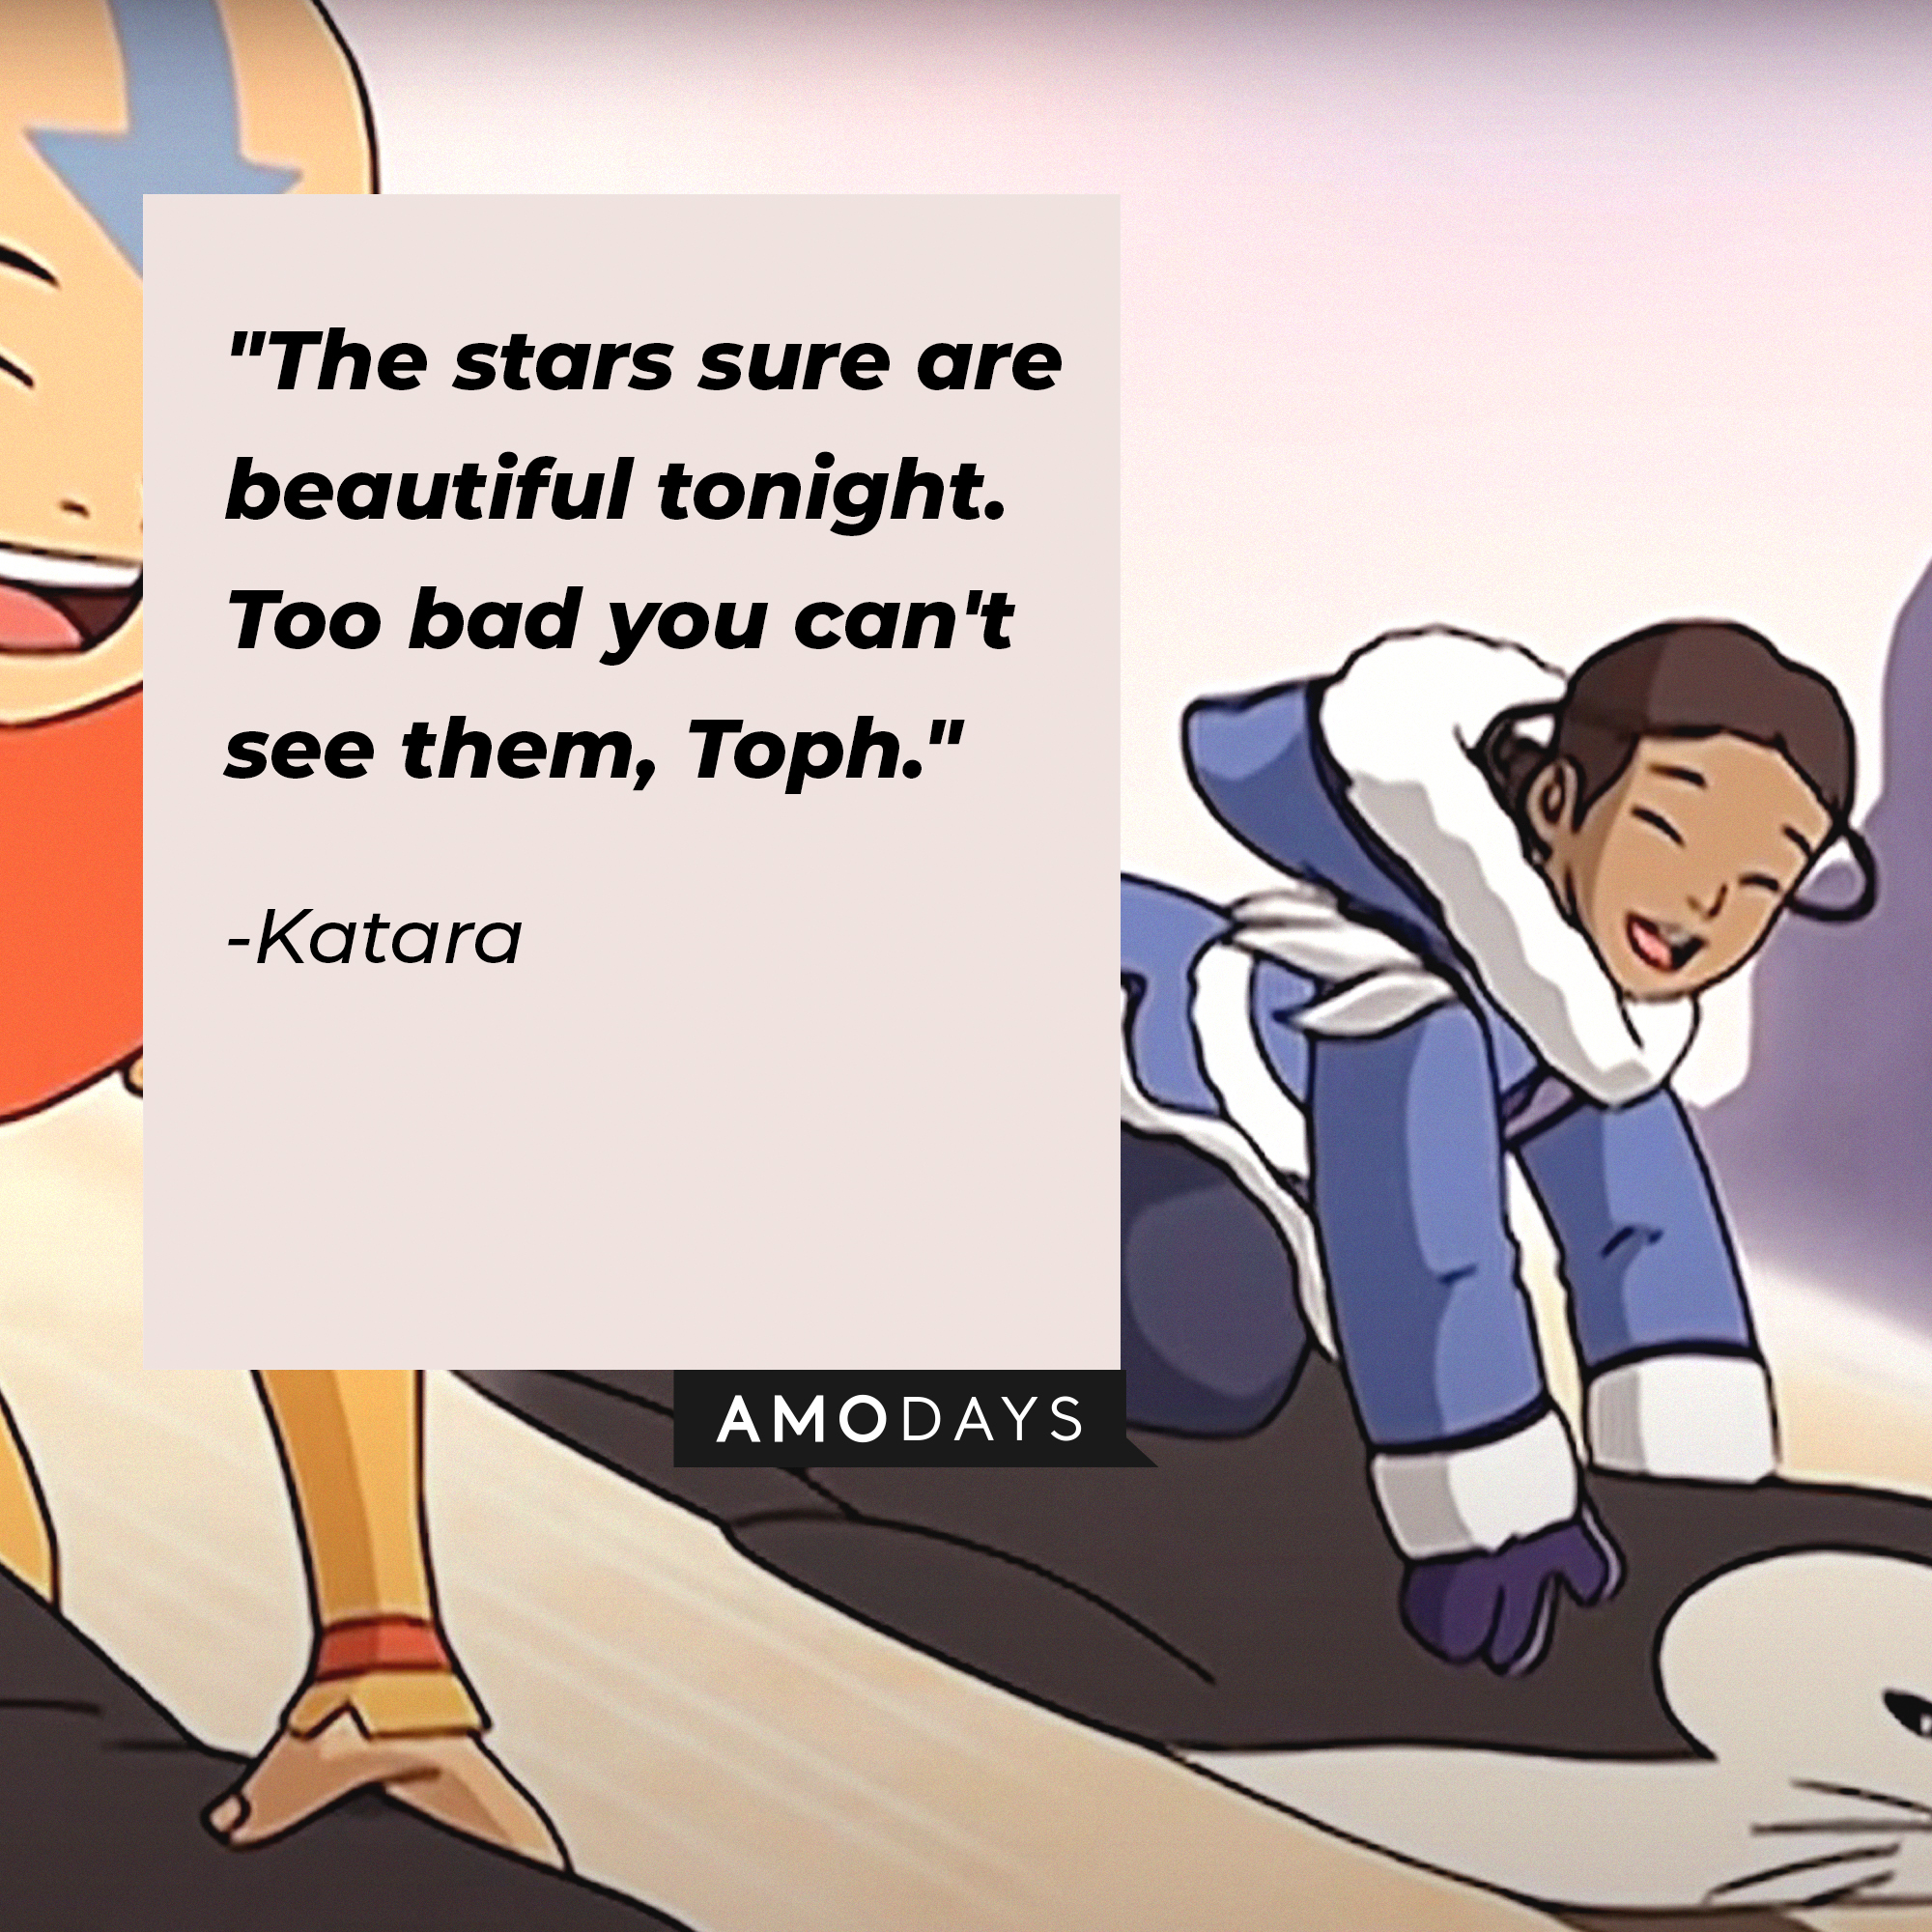 Katara's quote: "The stars sure are beautiful tonight. Too bad you can't see them, Toph." | Source: Youtube.com/TeamAvatar